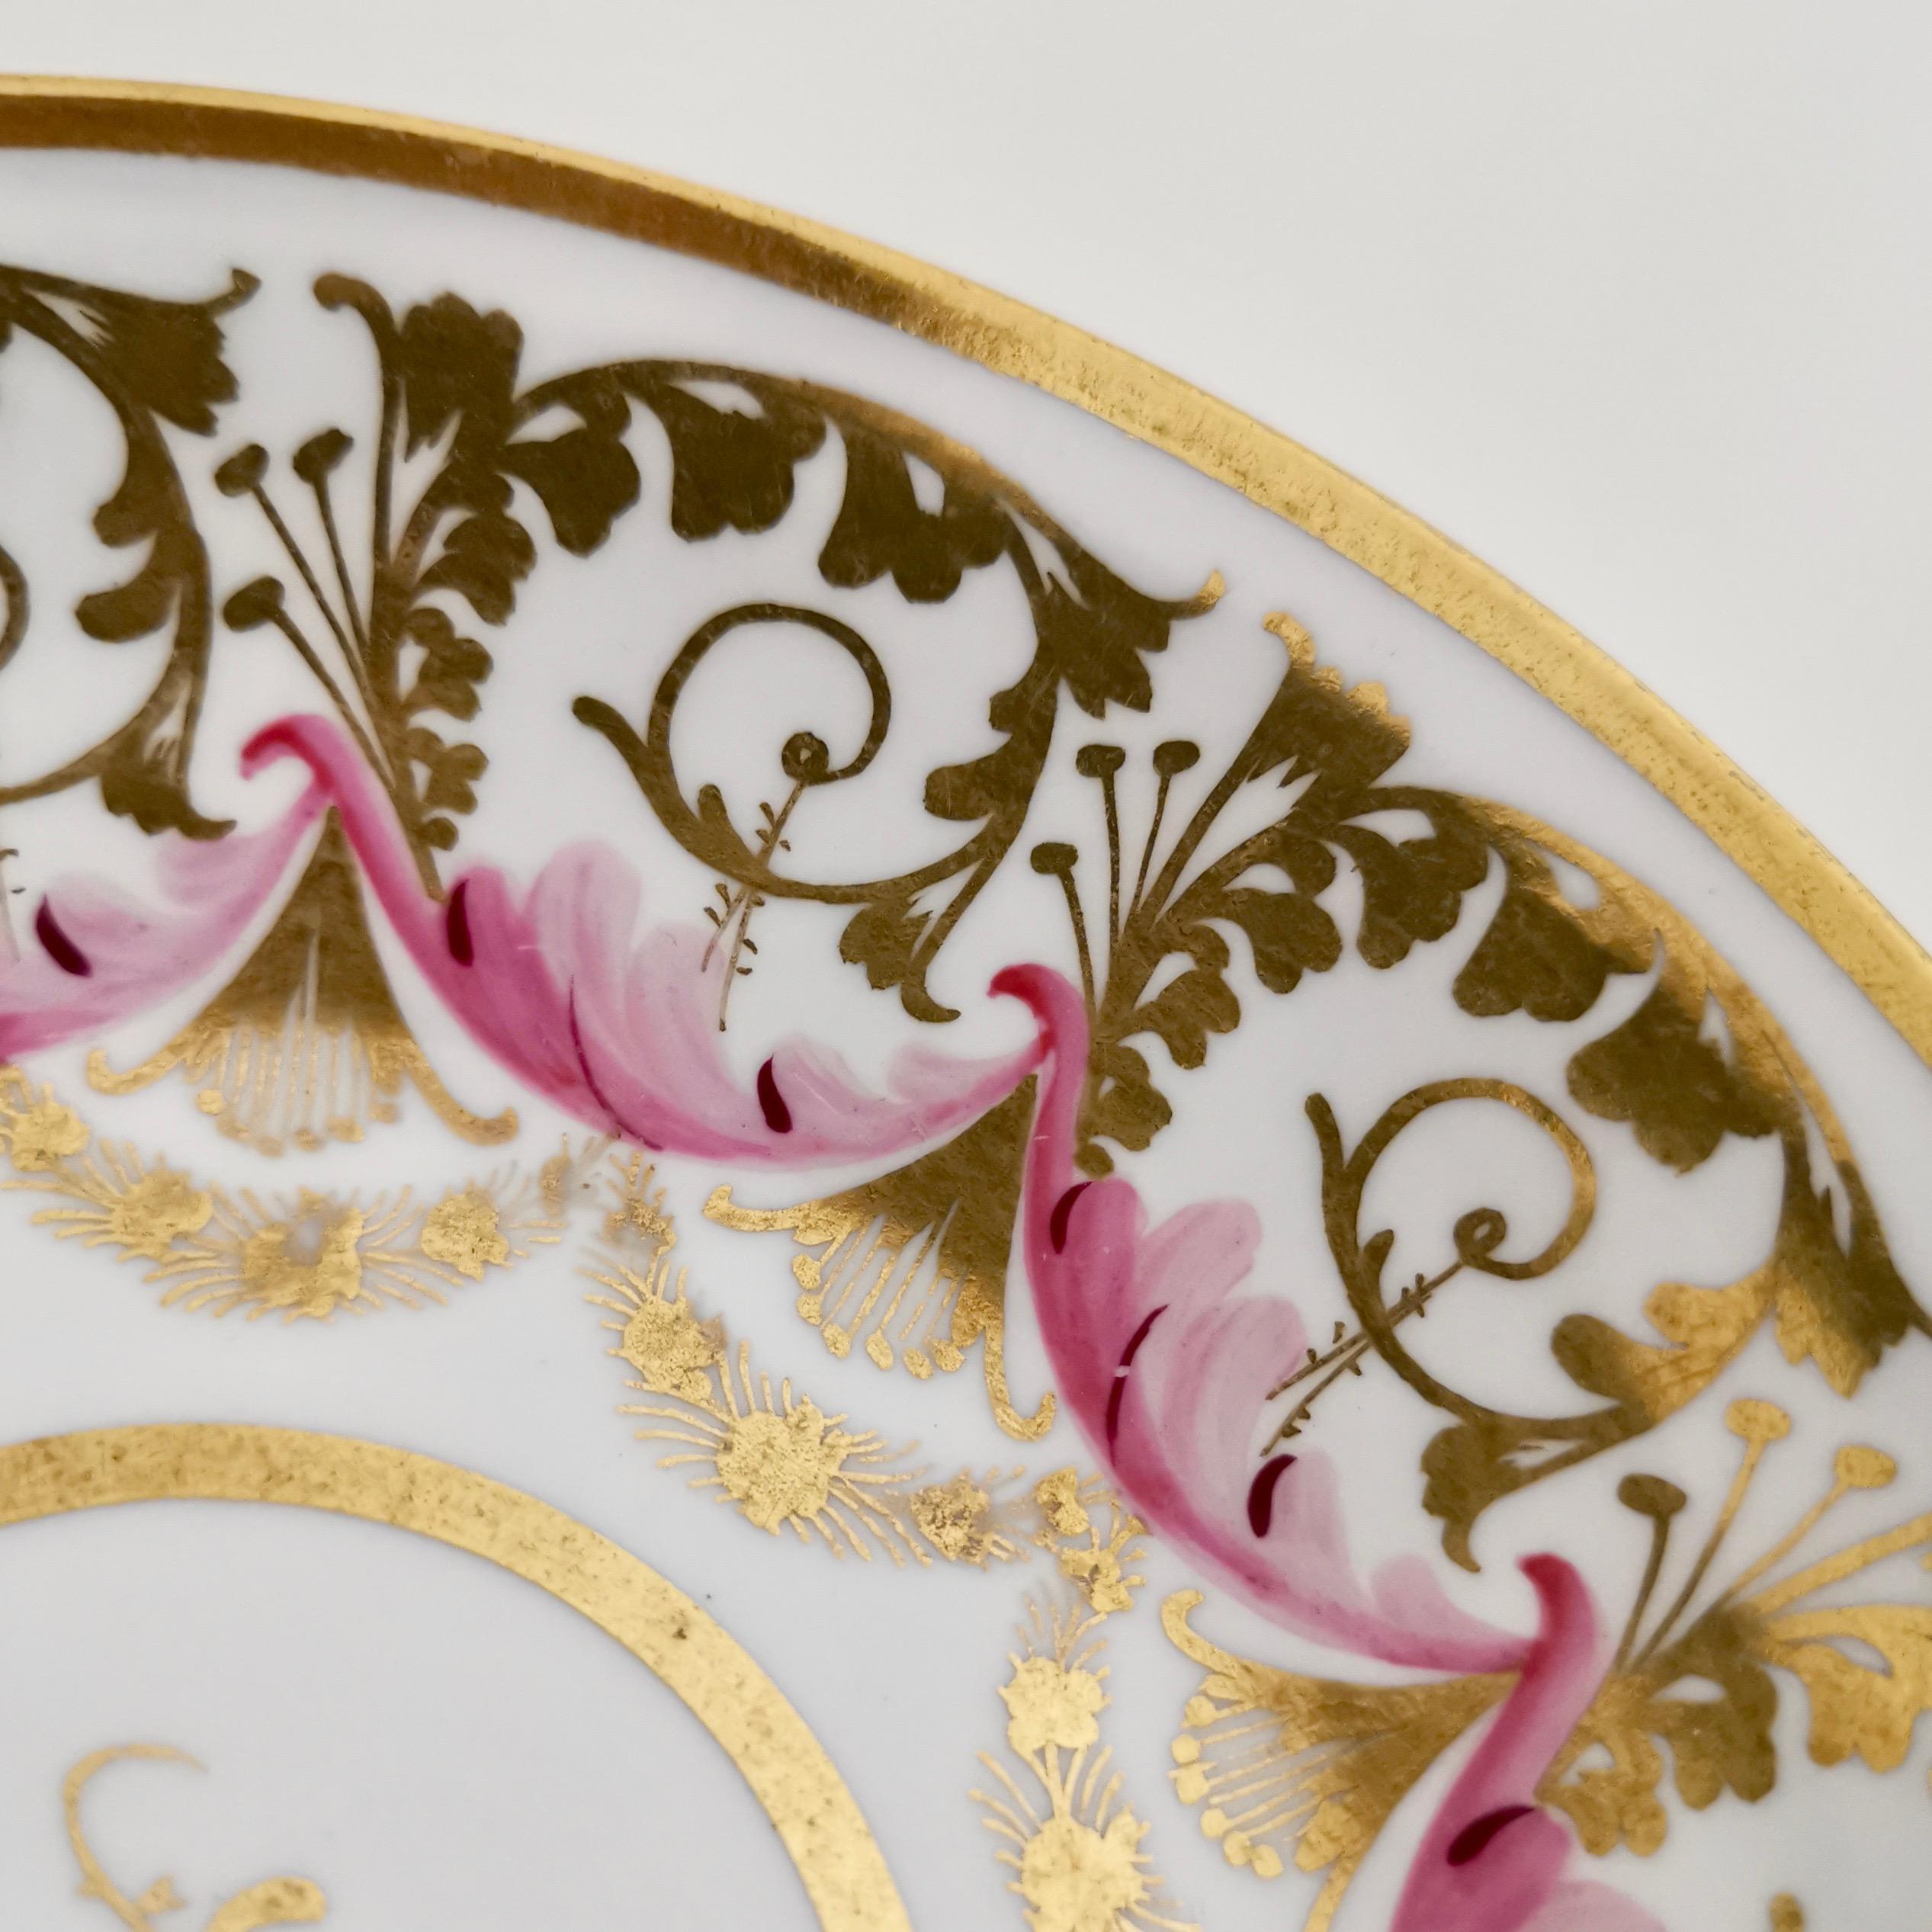 New Hall Cup and Saucer, Gilt and Pink Sprigs, Regency, 1815-1820 3